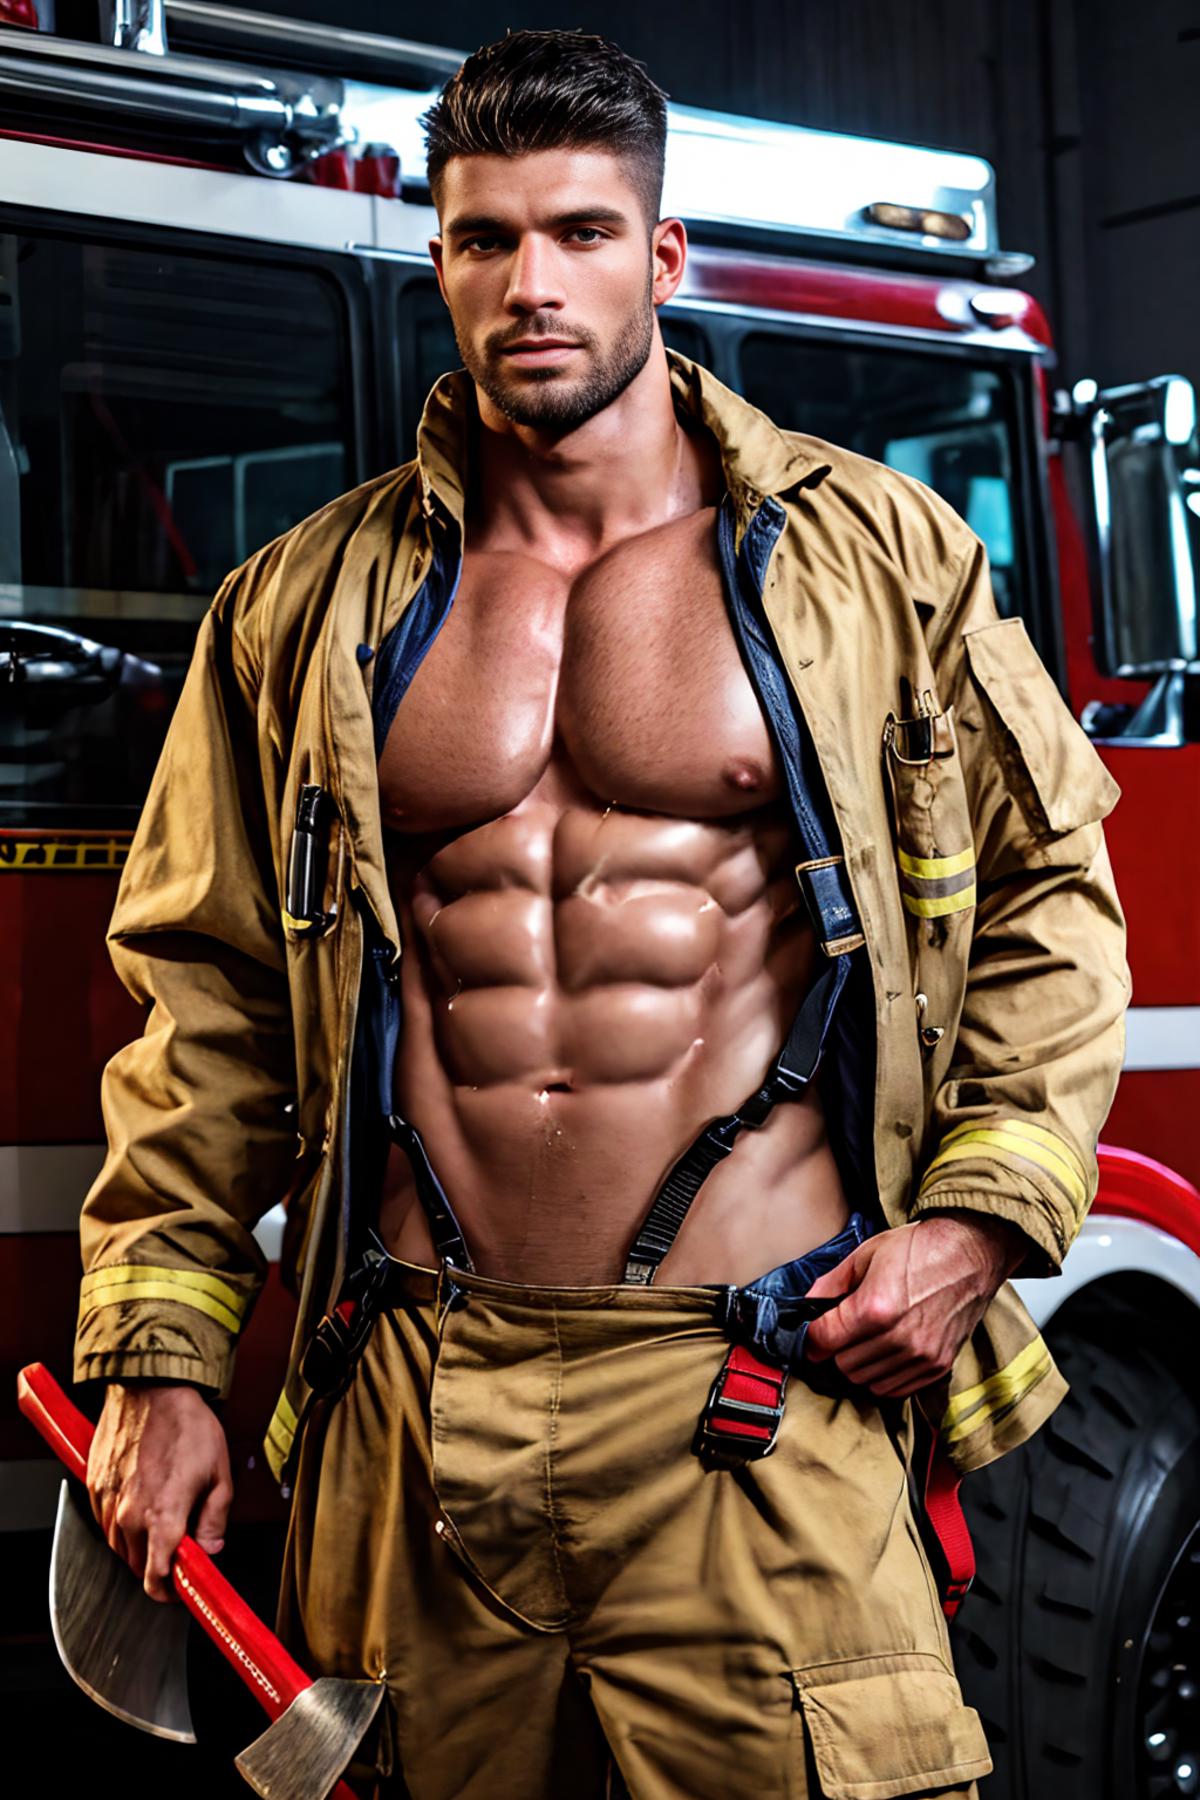 Sexy Firefighter Outfit image by Kairen92